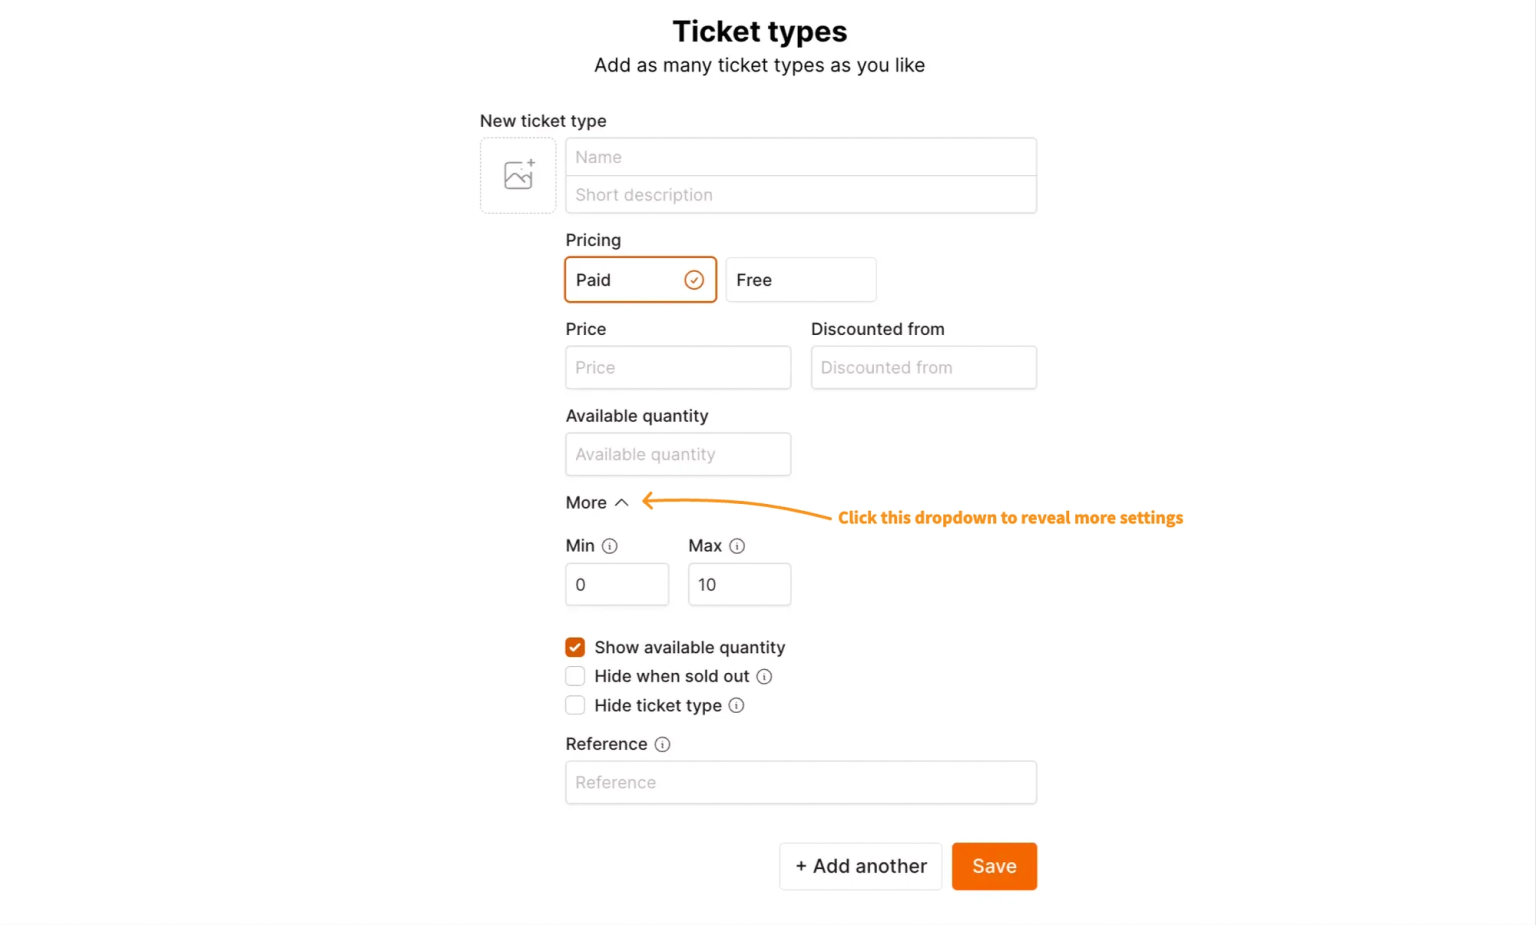 Click this dropdown to reveal more ticket type settings